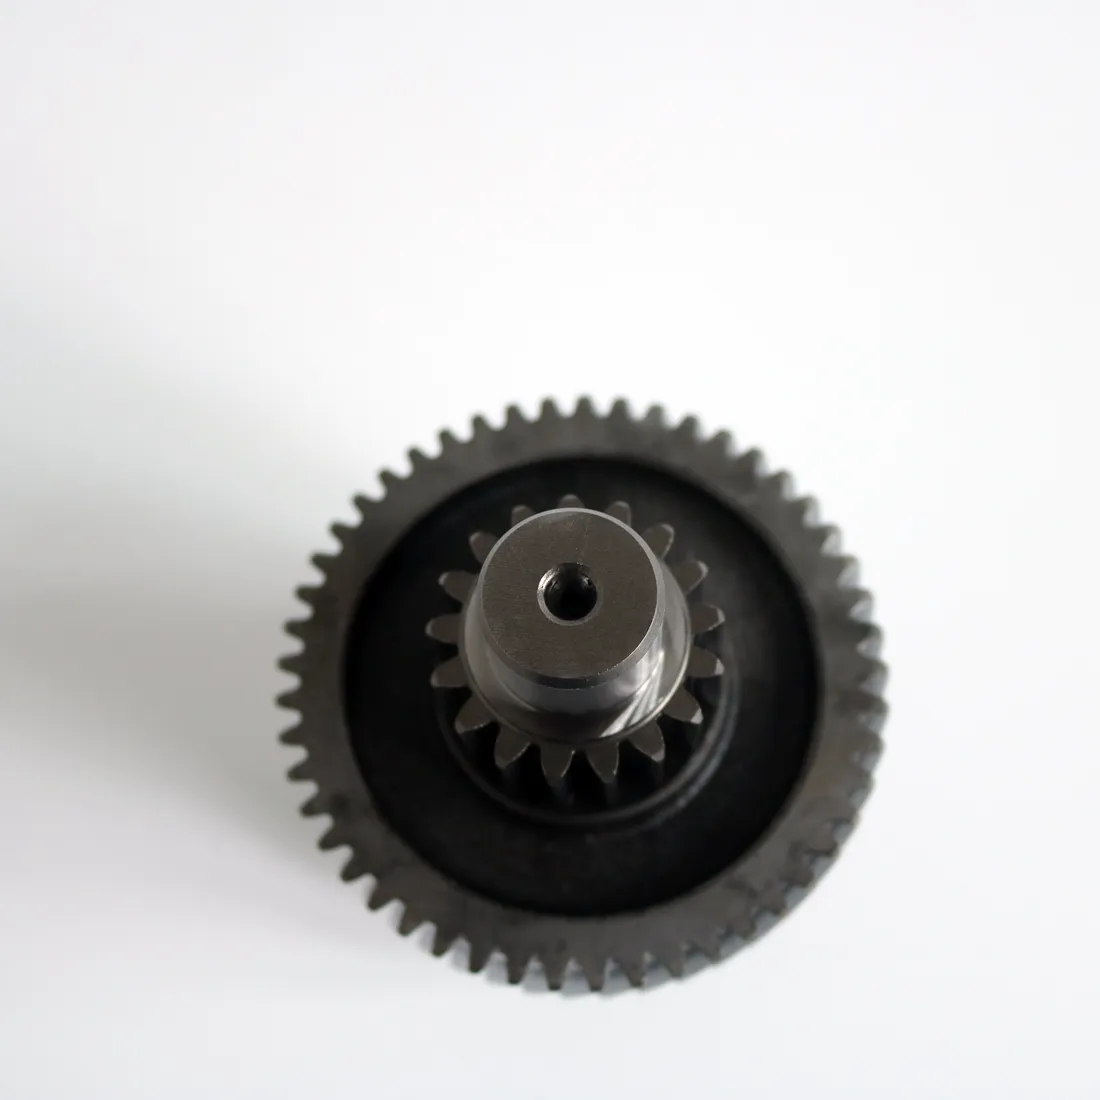 Front+Reverse Gear Main Countershaft Transmission Gear Box Main Counter Shaft for ATV engine